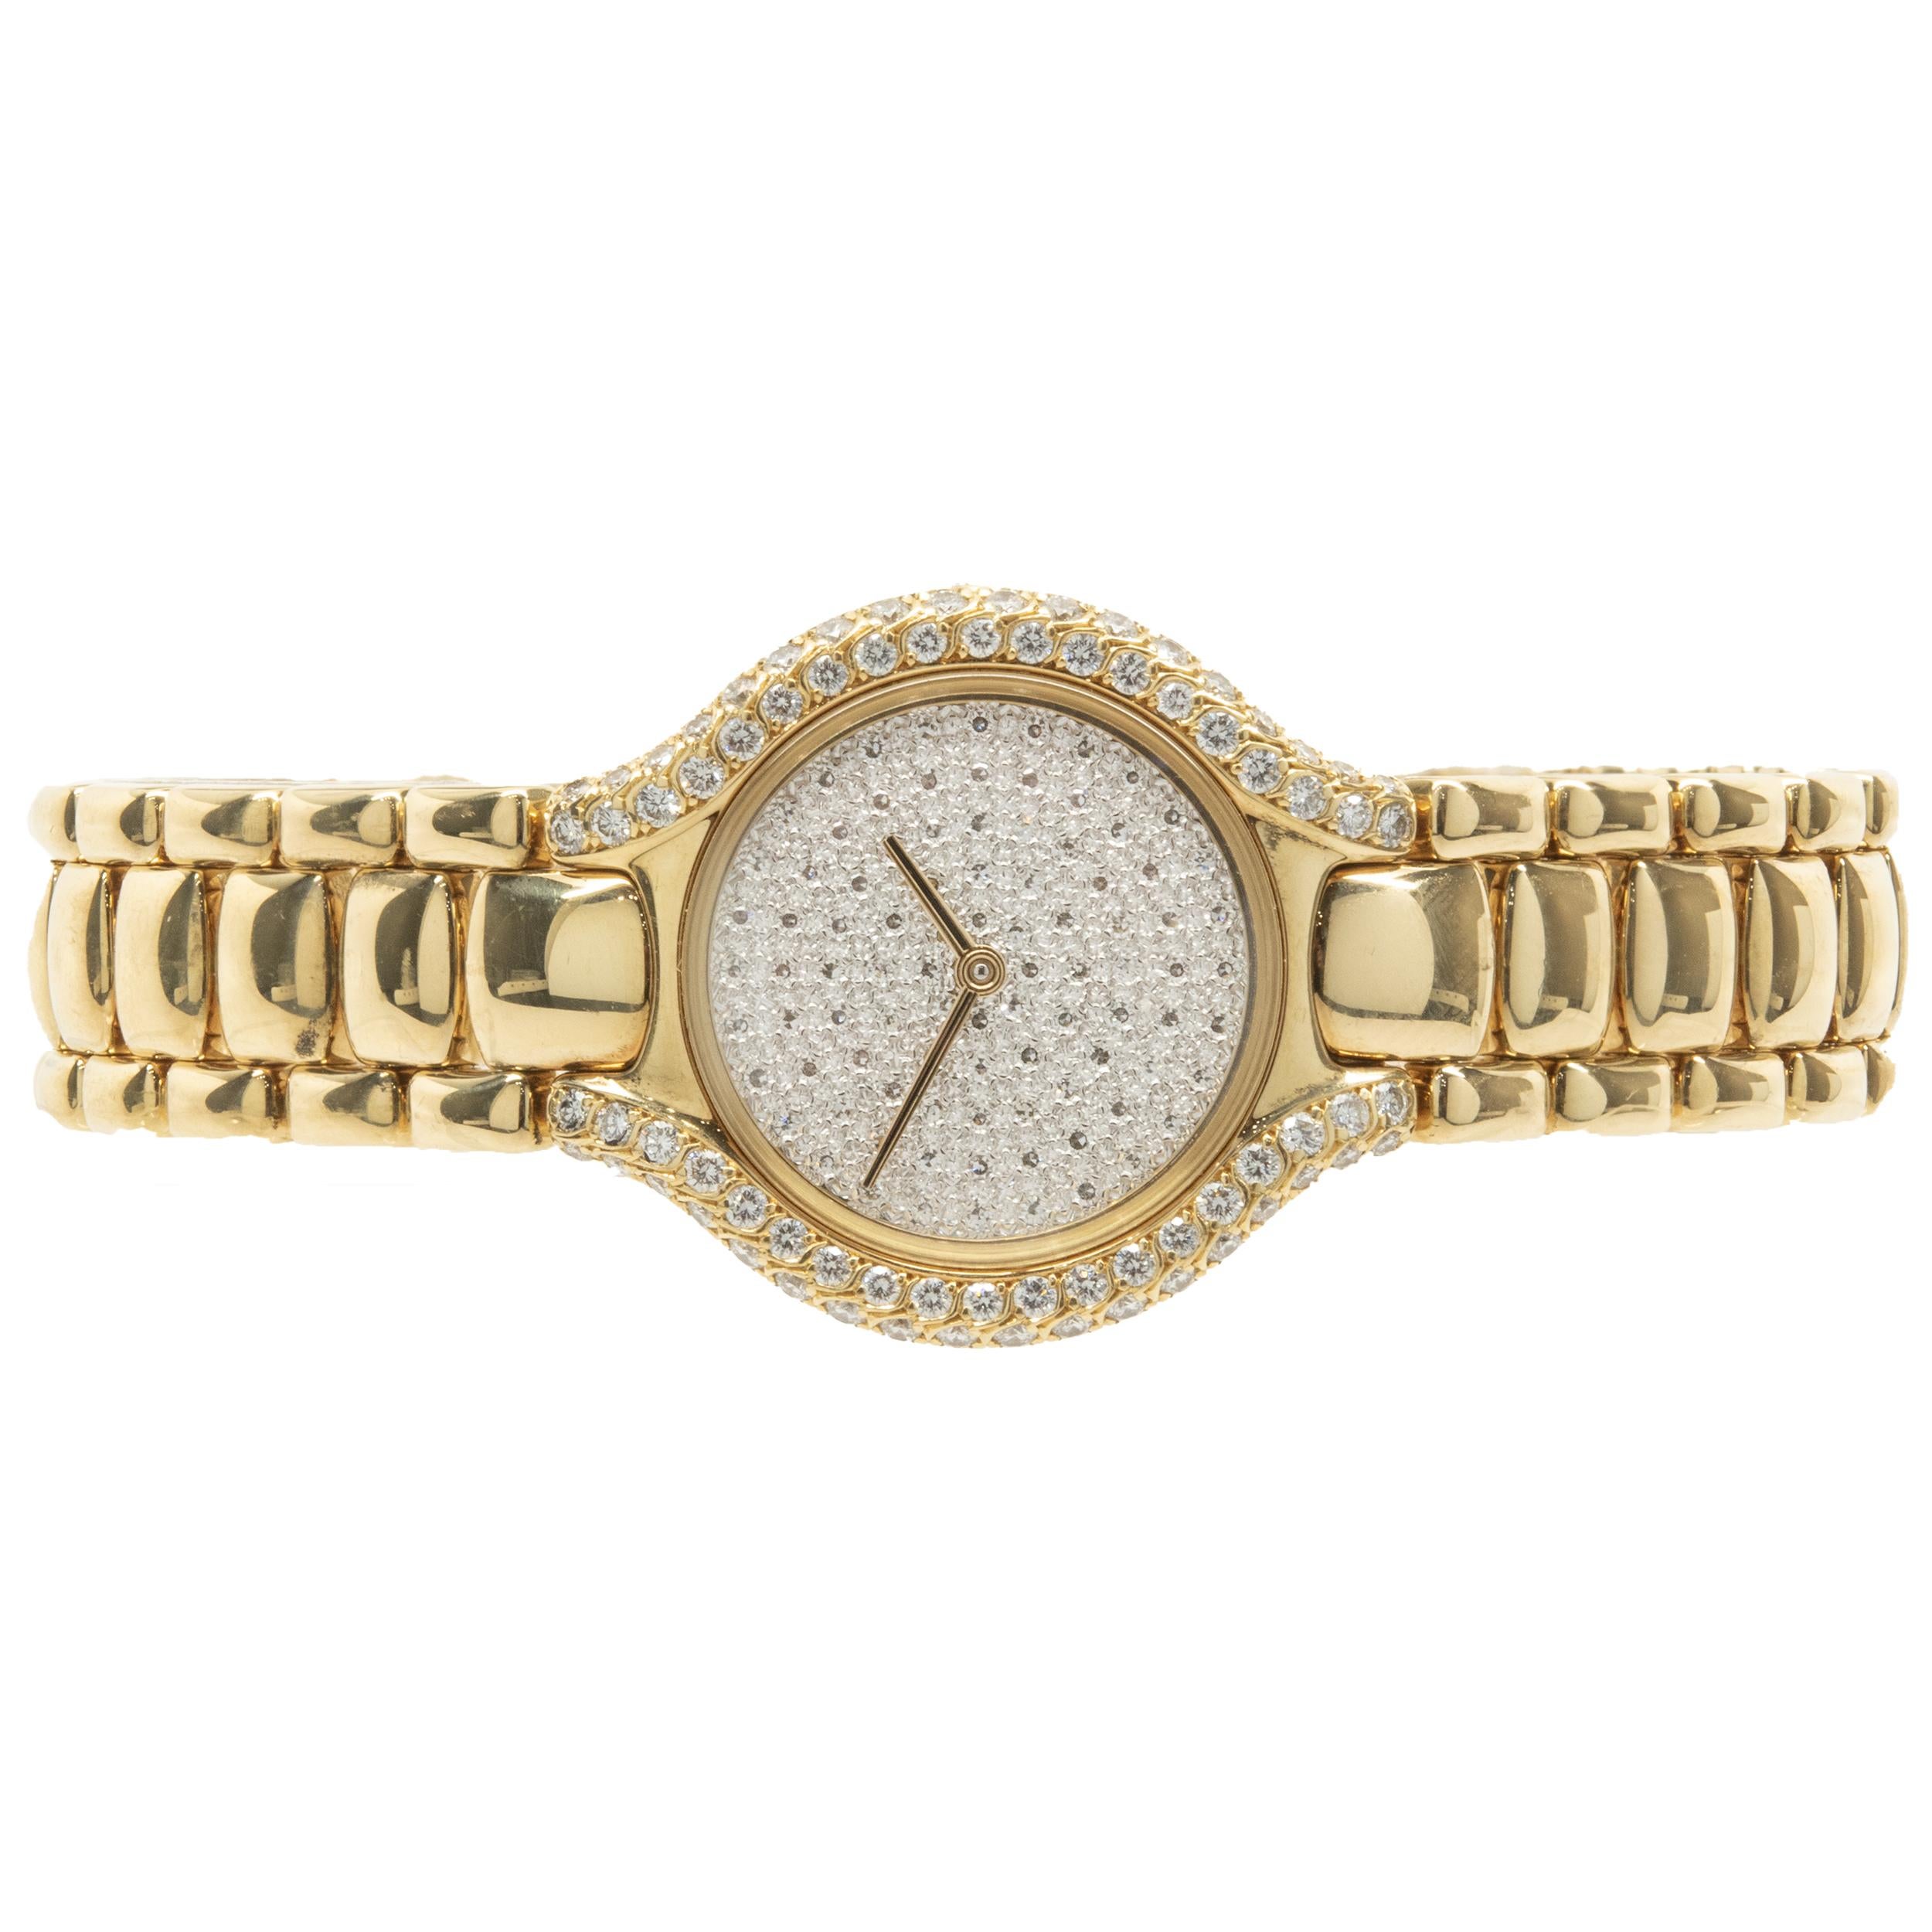 Movement: quartz
Function: hours, minutes
Case: 24mm 18K yellow gold round case, pave diamond bezel 
Band: Ebel 18K yellow gold beluga link
Dial: pave diamond dial
Serial: 42116XXX
Reference: 866969

No box or papers included
Guaranteed to be